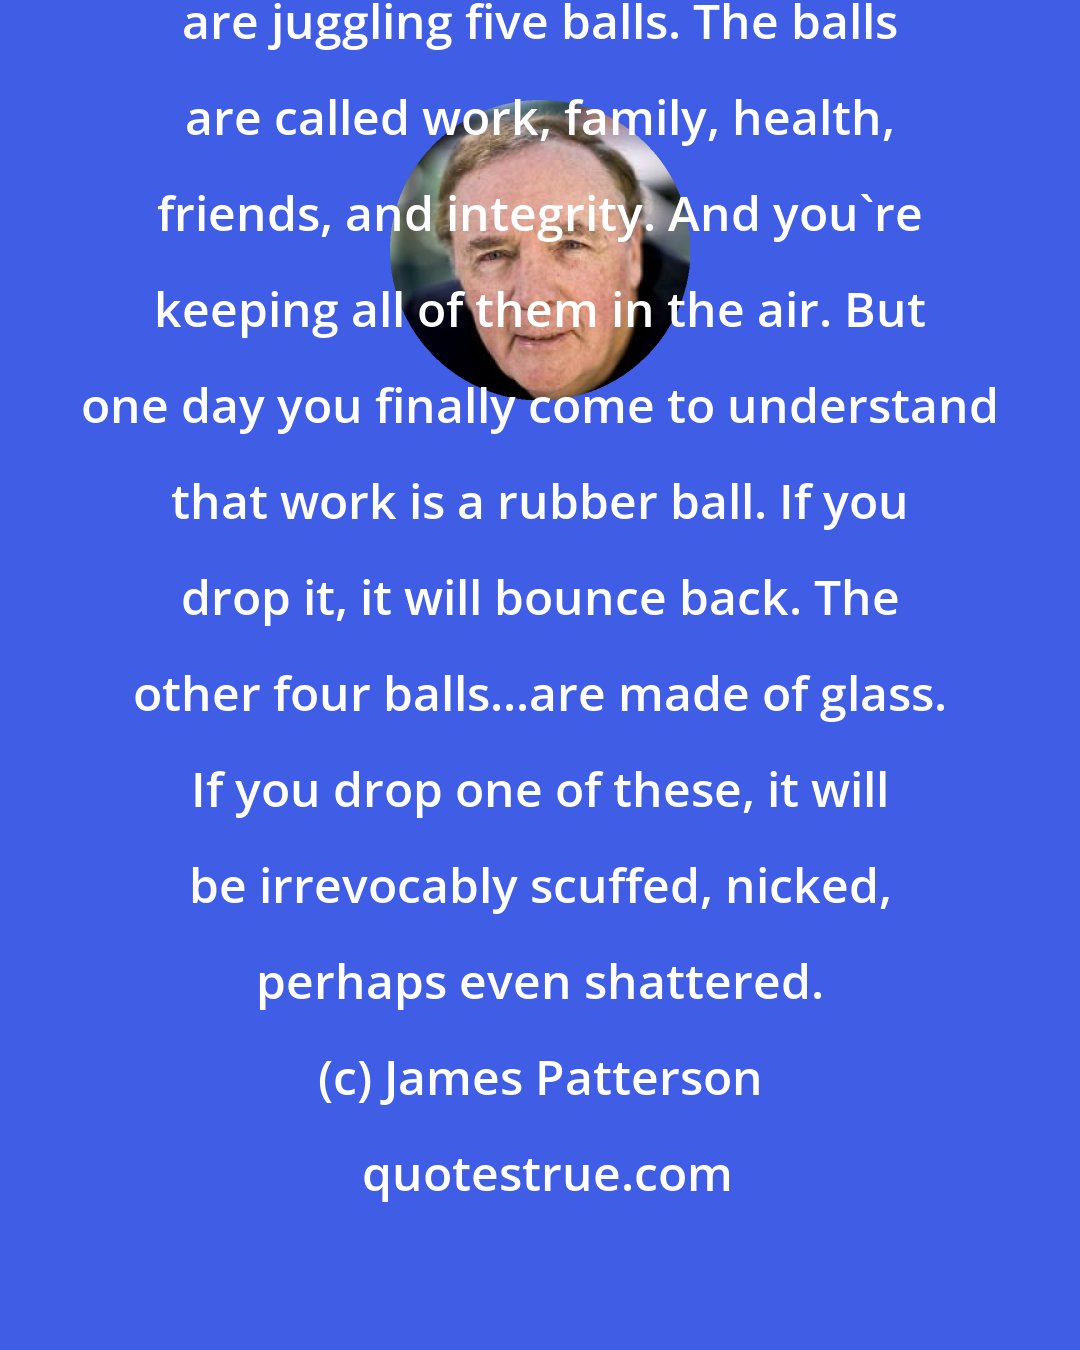 James Patterson: Imagine life is a game in which you are juggling five balls. The balls are called work, family, health, friends, and integrity. And you're keeping all of them in the air. But one day you finally come to understand that work is a rubber ball. If you drop it, it will bounce back. The other four balls...are made of glass. If you drop one of these, it will be irrevocably scuffed, nicked, perhaps even shattered.